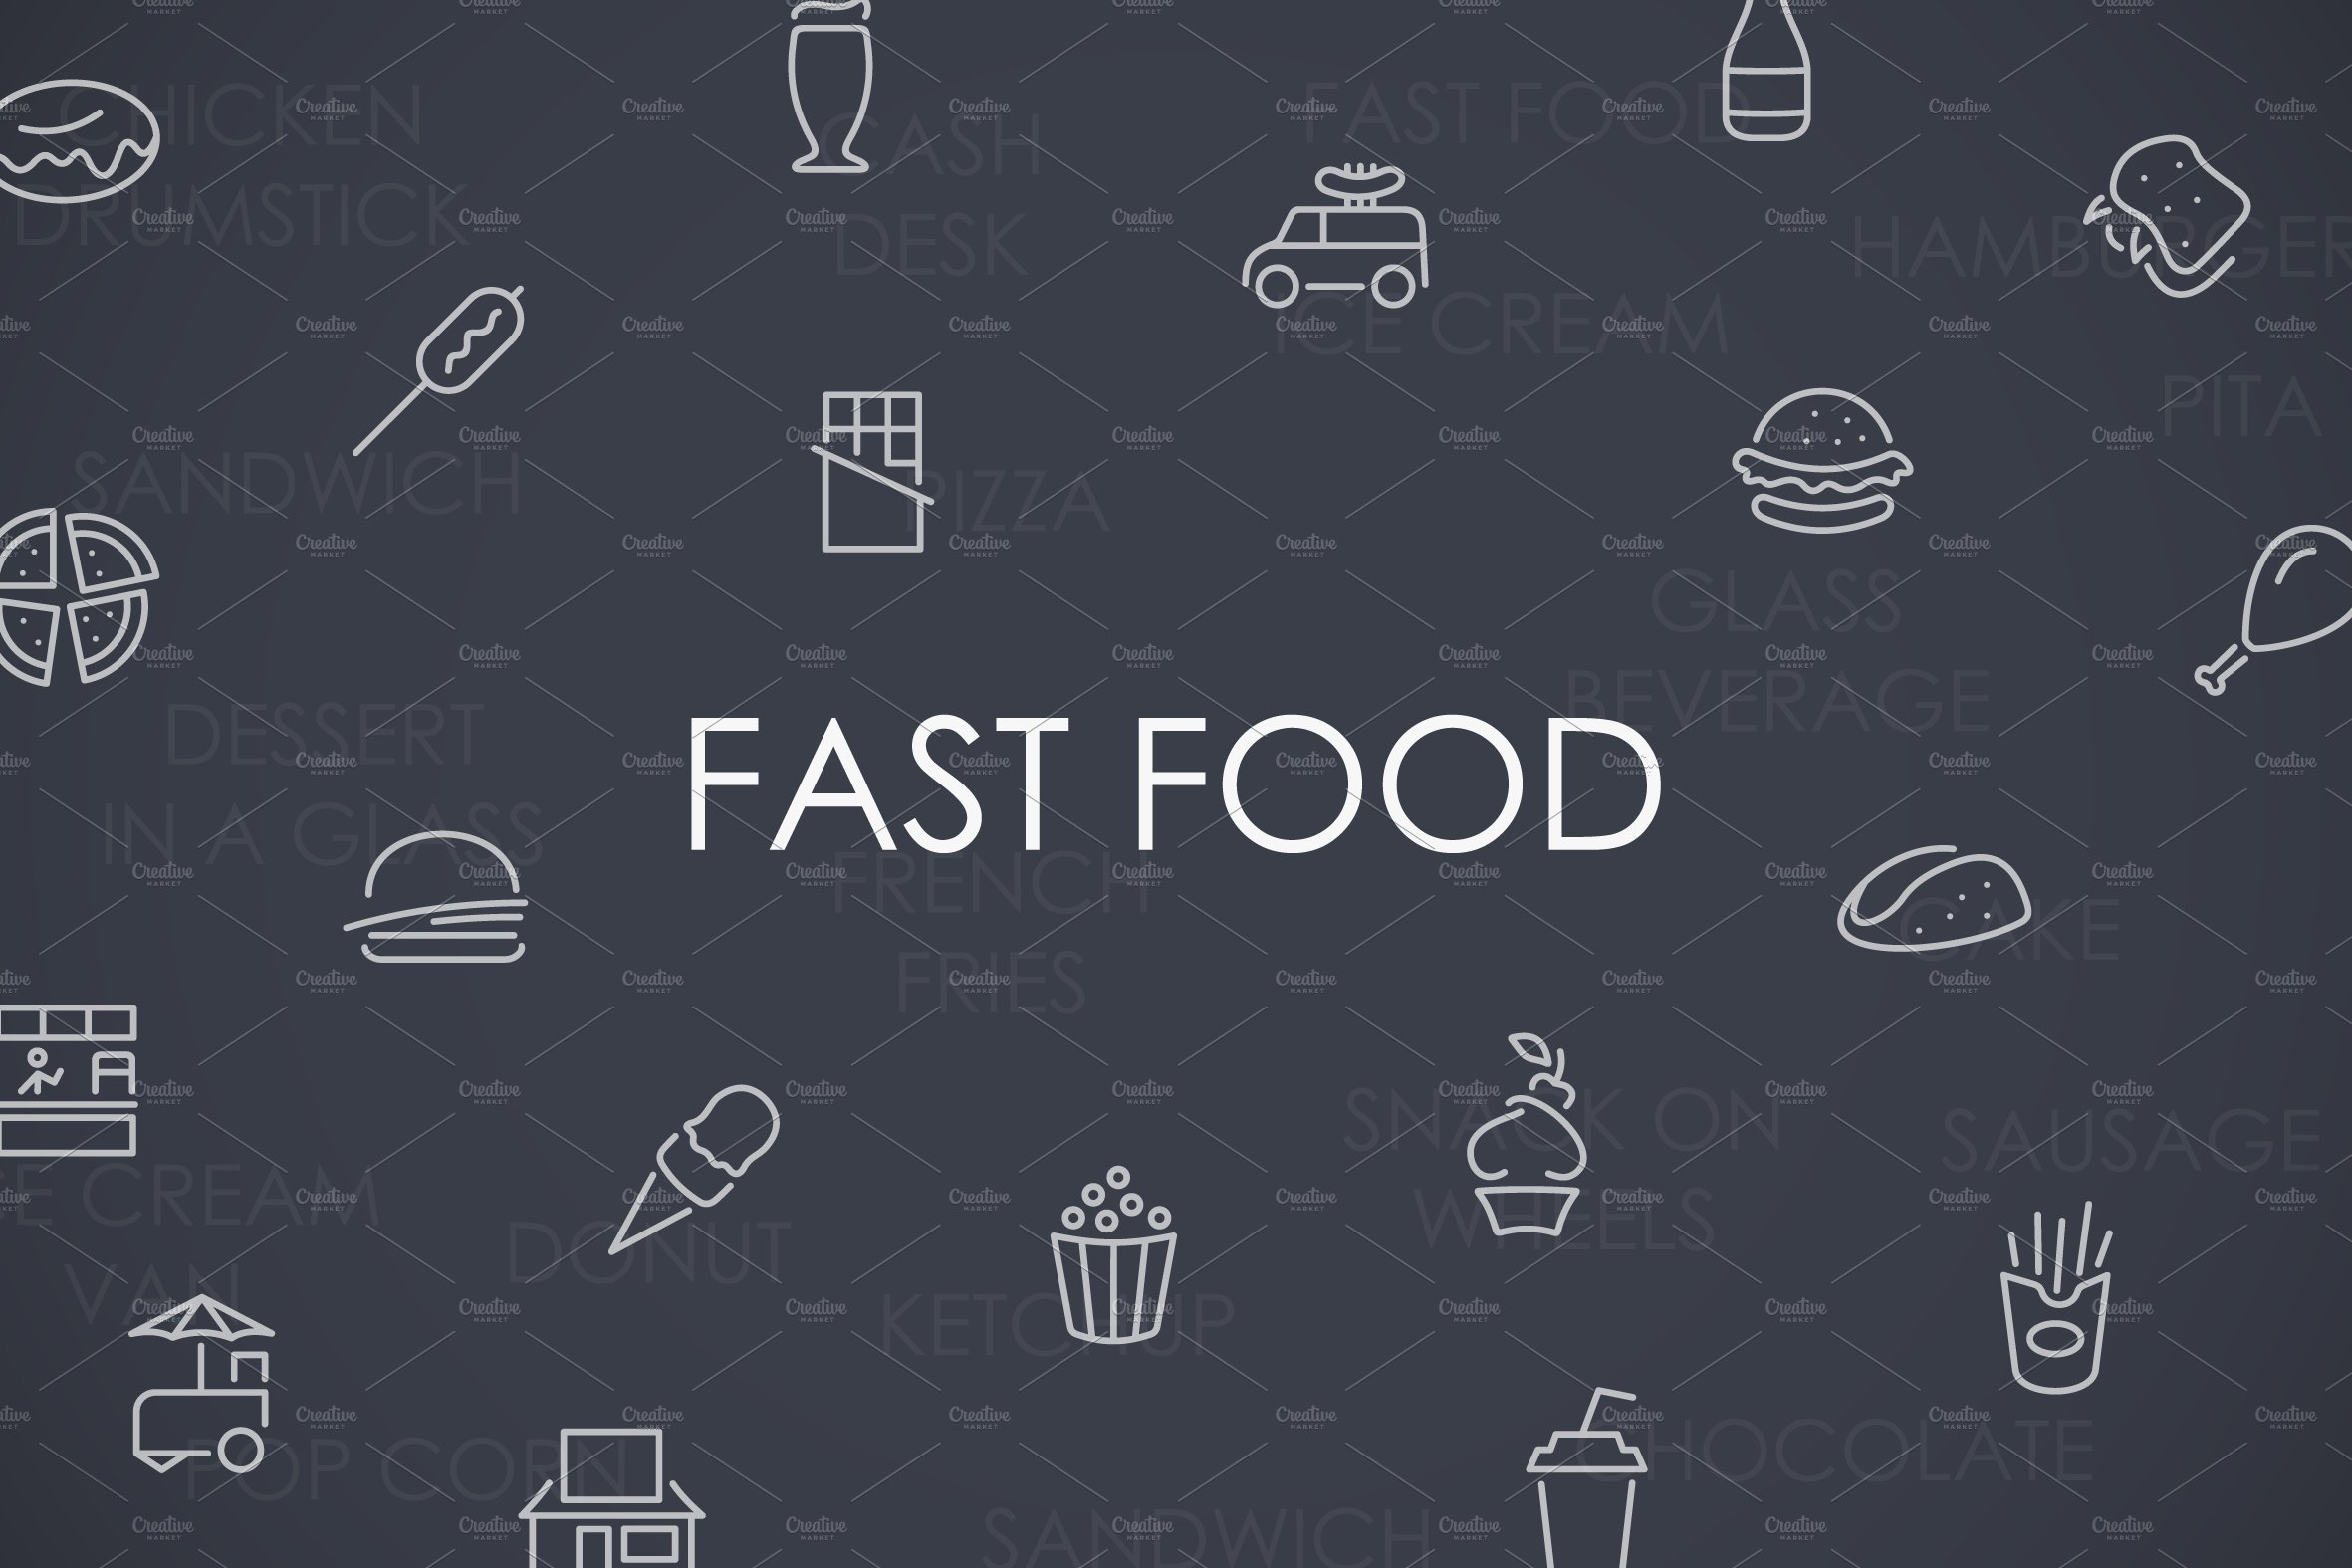 Fast food thinline icons preview image.